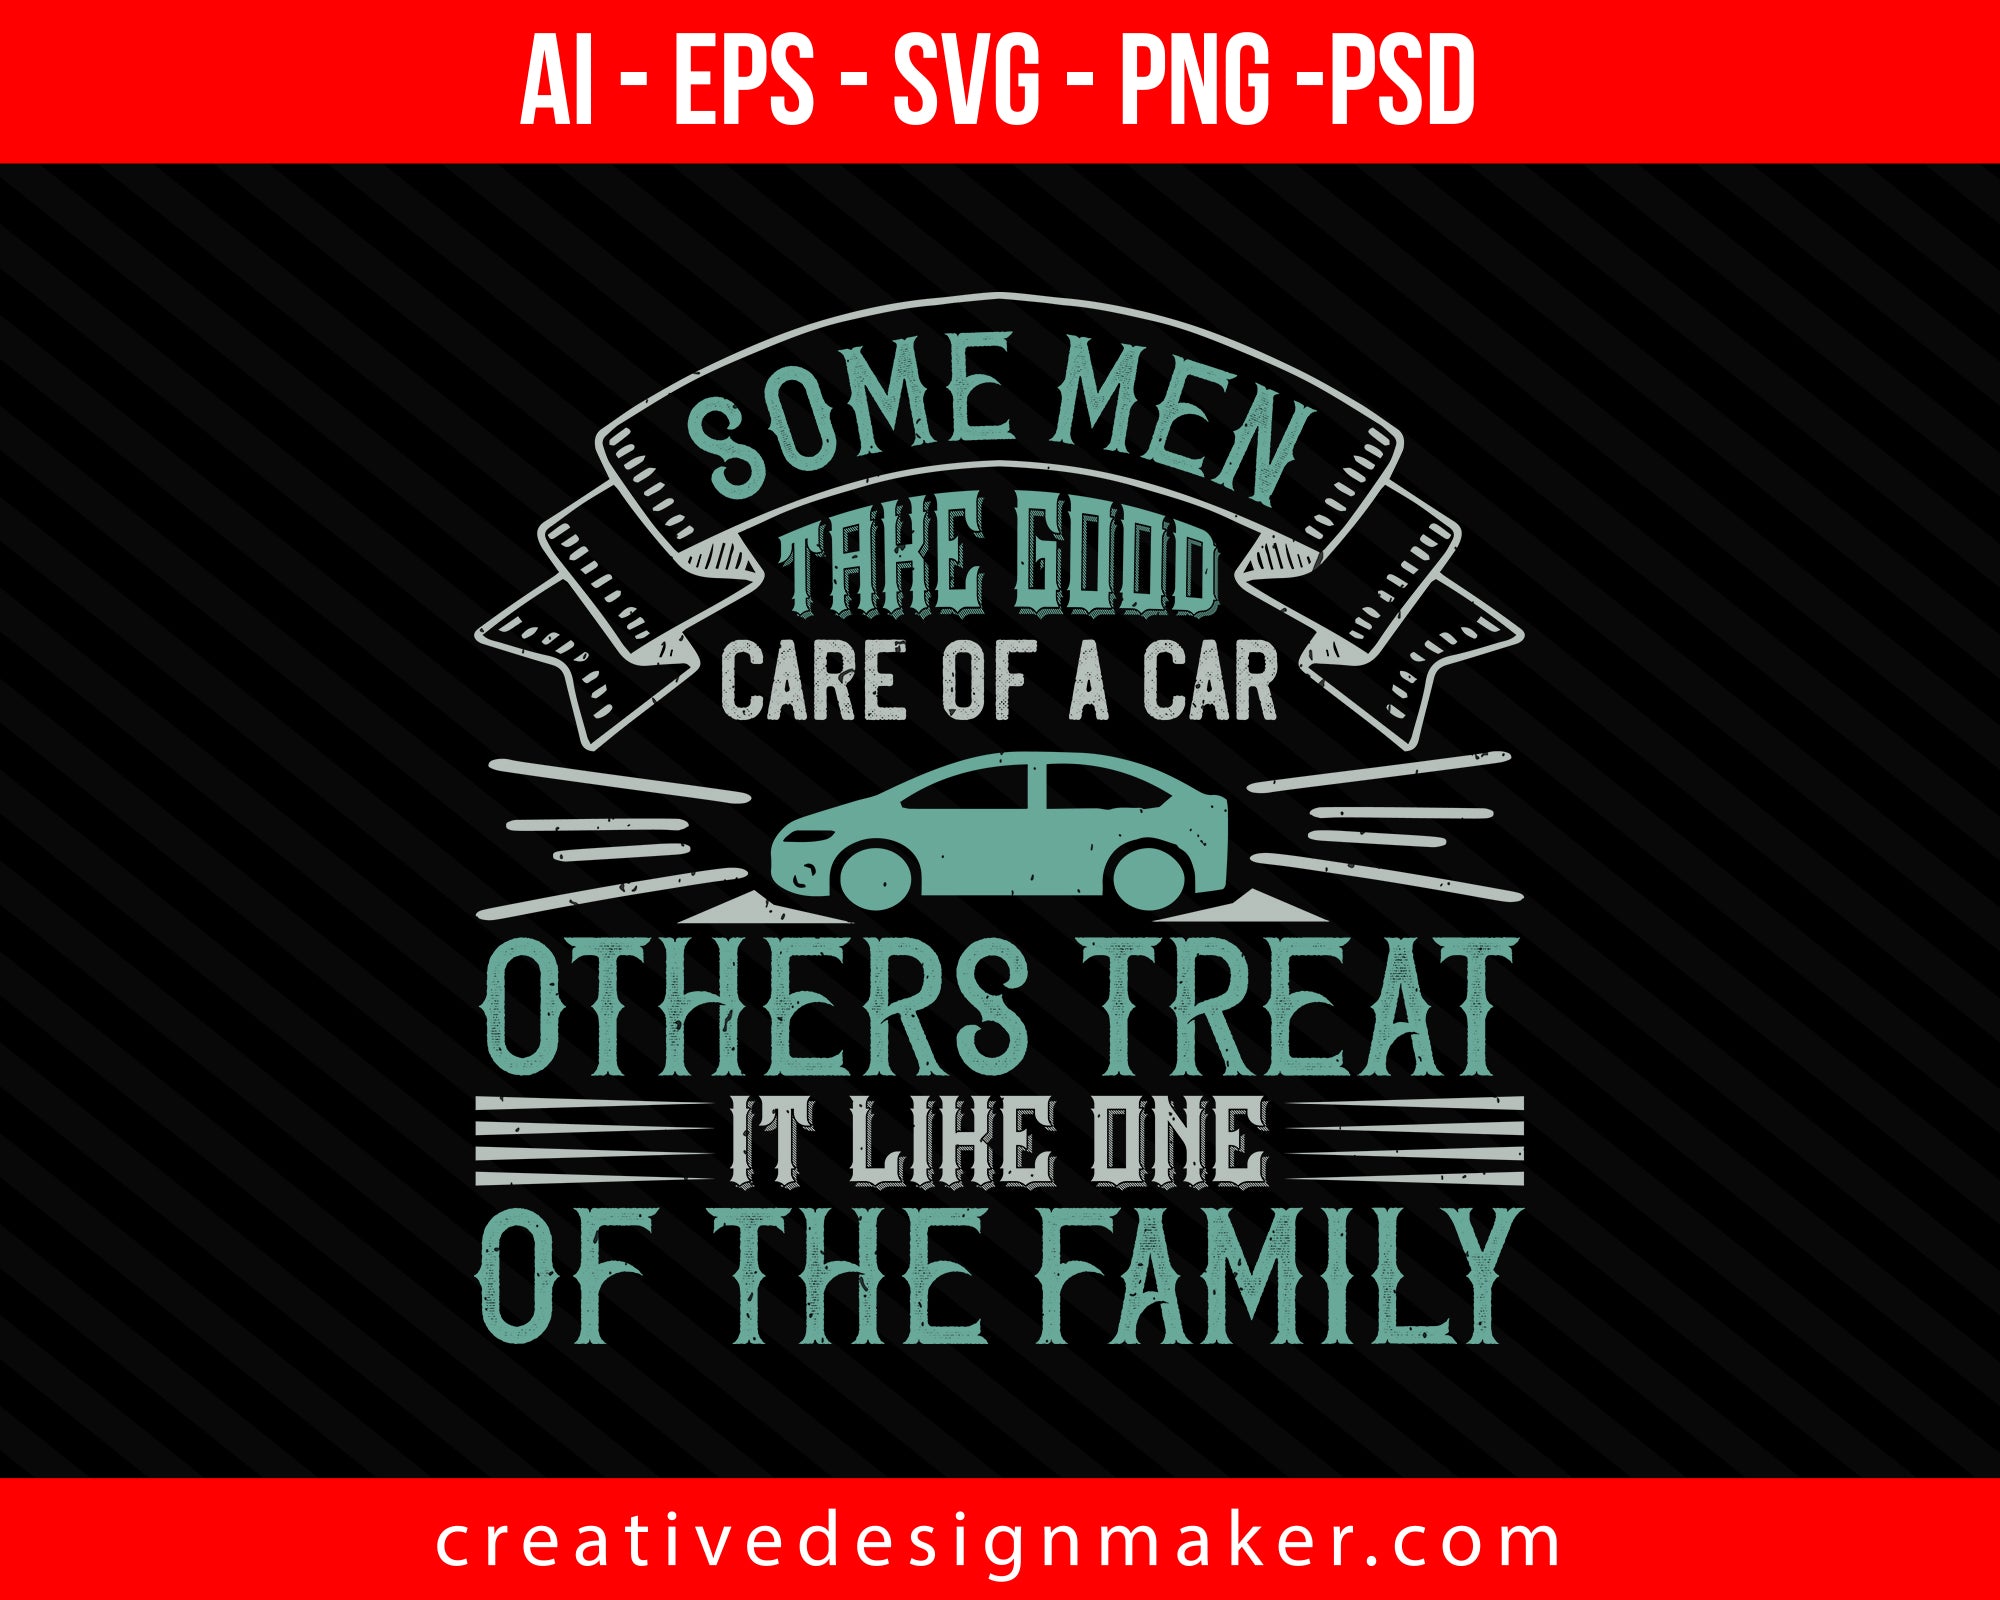 Some men take good care of a car; others treat it like one of the family Print Ready Editable T-Shirt SVG Design!